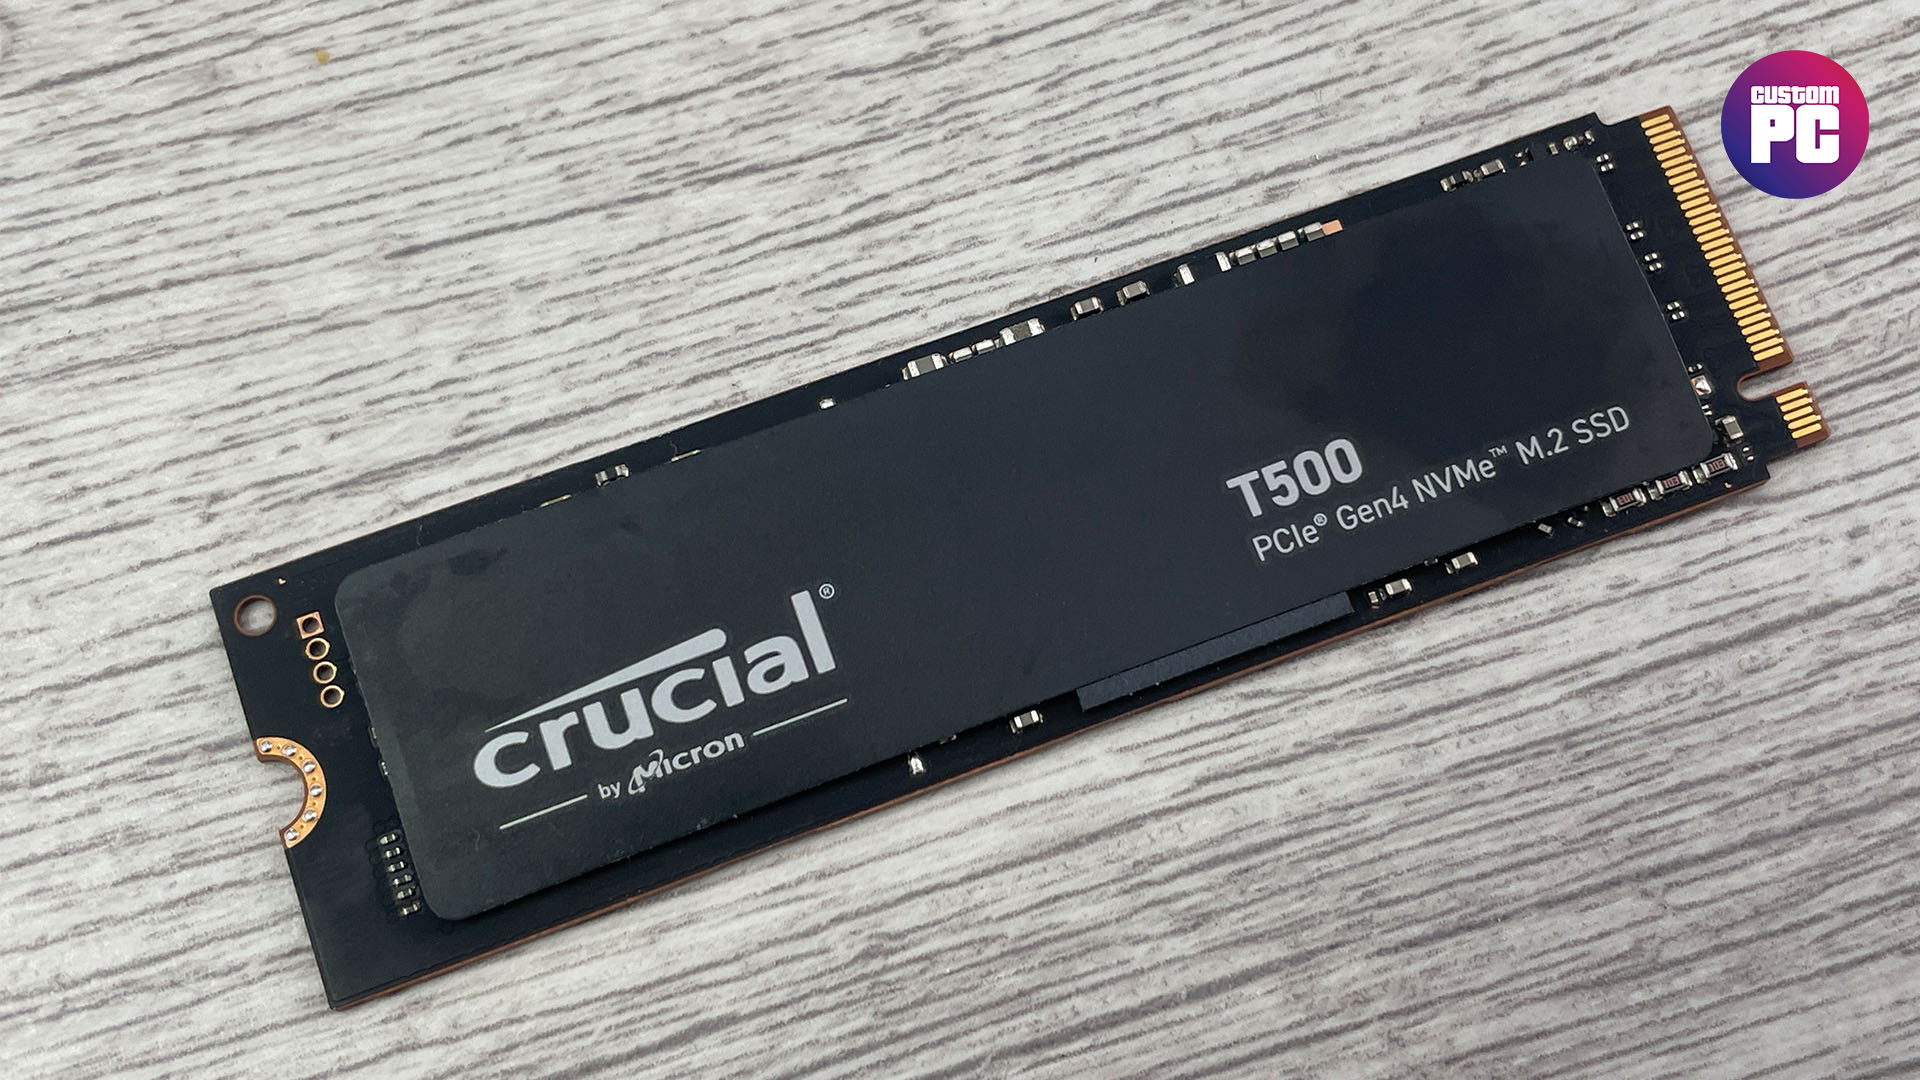 Crucial T500 review